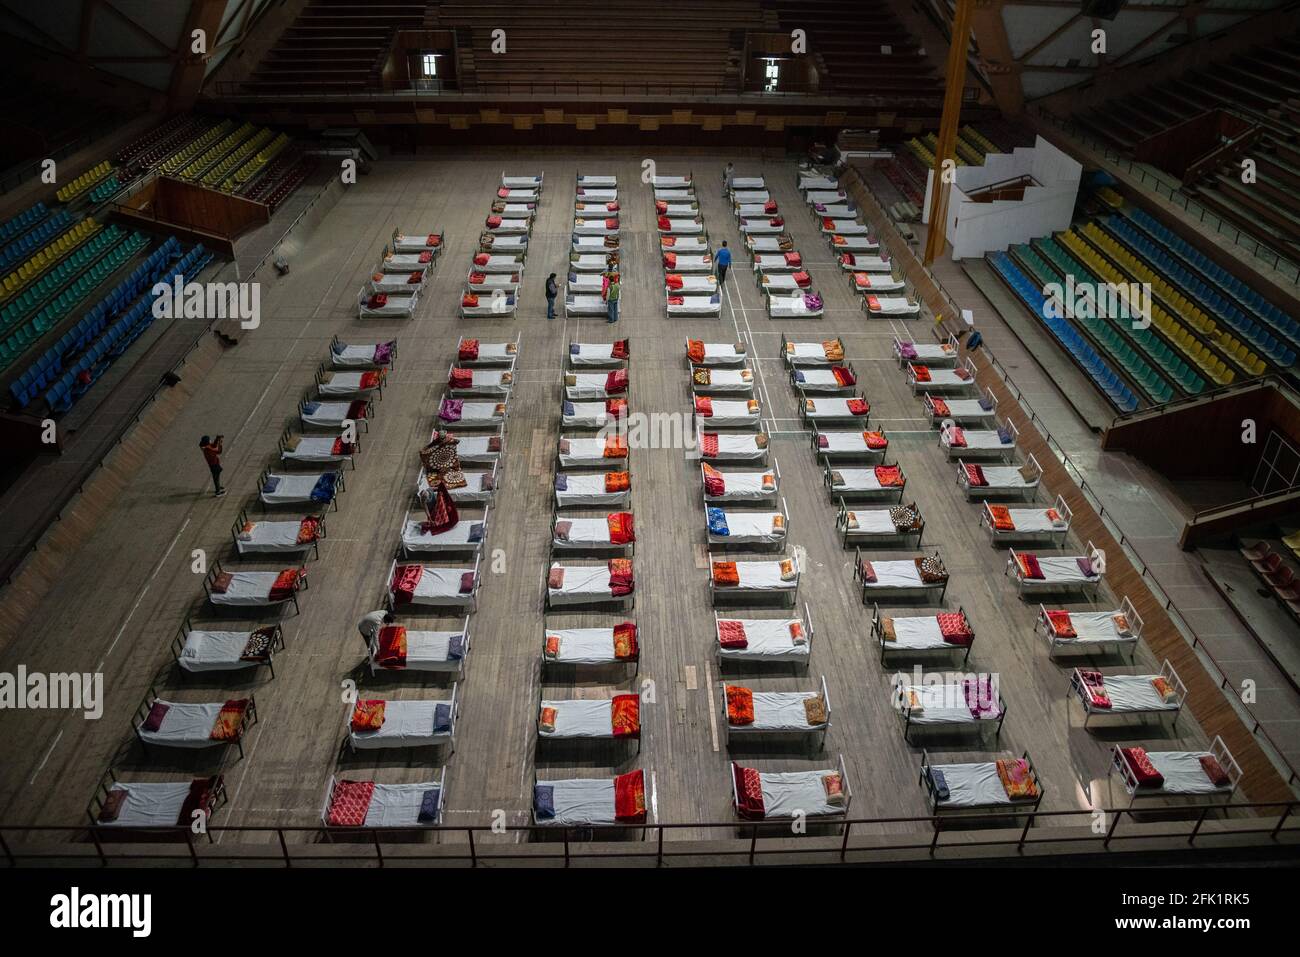 Srinagar, India. 27th Apr, 2021. Rows of beds are placed inside an indoor sports stadium turned COVID-19 isolation center in Srinagar. The Jammu and Kashmir reported 3,164 positive cases, highest ever since the outbreak of Covid-19 pandemic last year, pushing the number of active cases to 22,283 which otherwise were less than 600 around a month before. A 20 year old woman was reported among the Twenty five deaths in J&K in the last 24 hours taking the death toll to 2,197. (Photo by Idrees Abbas/SOPA Images/Sipa USA) Credit: Sipa USA/Alamy Live News Stock Photo